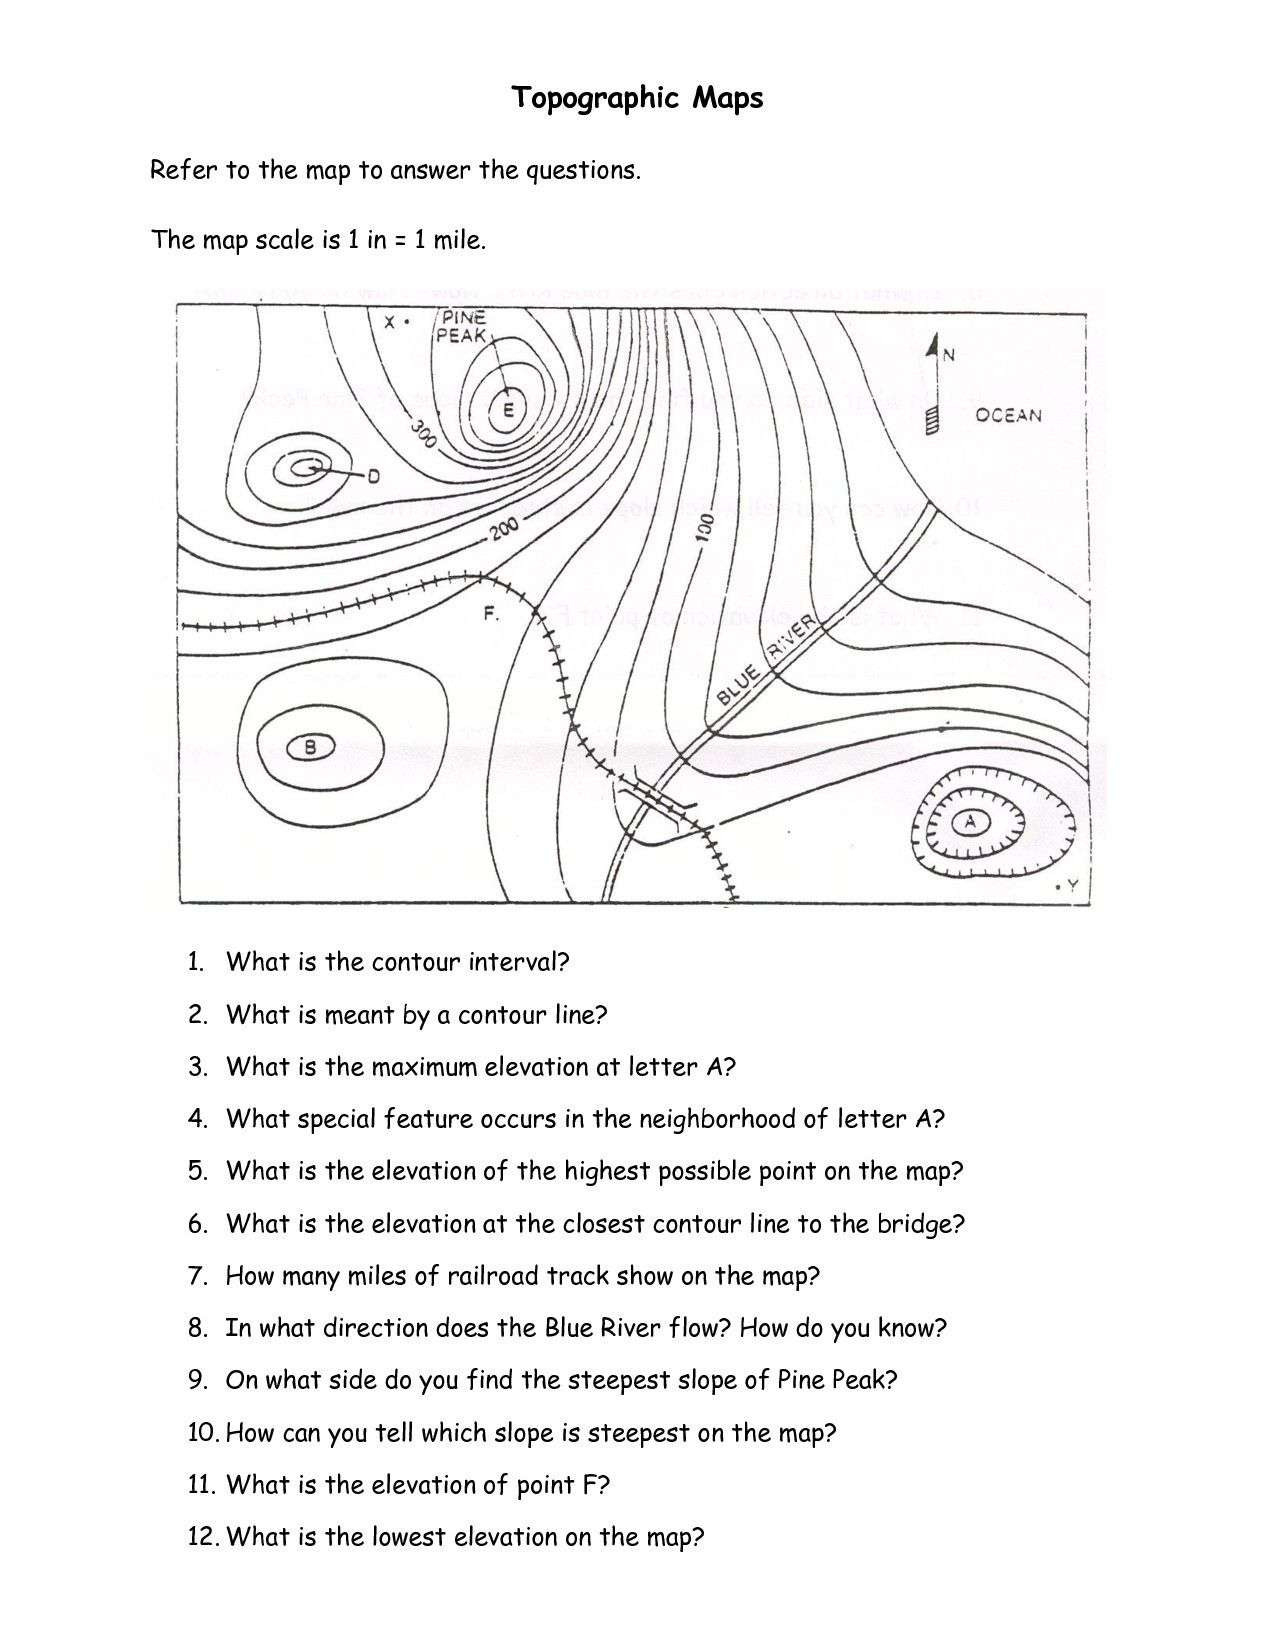 Topographic Map Worksheet Answers Worksheet Idea 7 